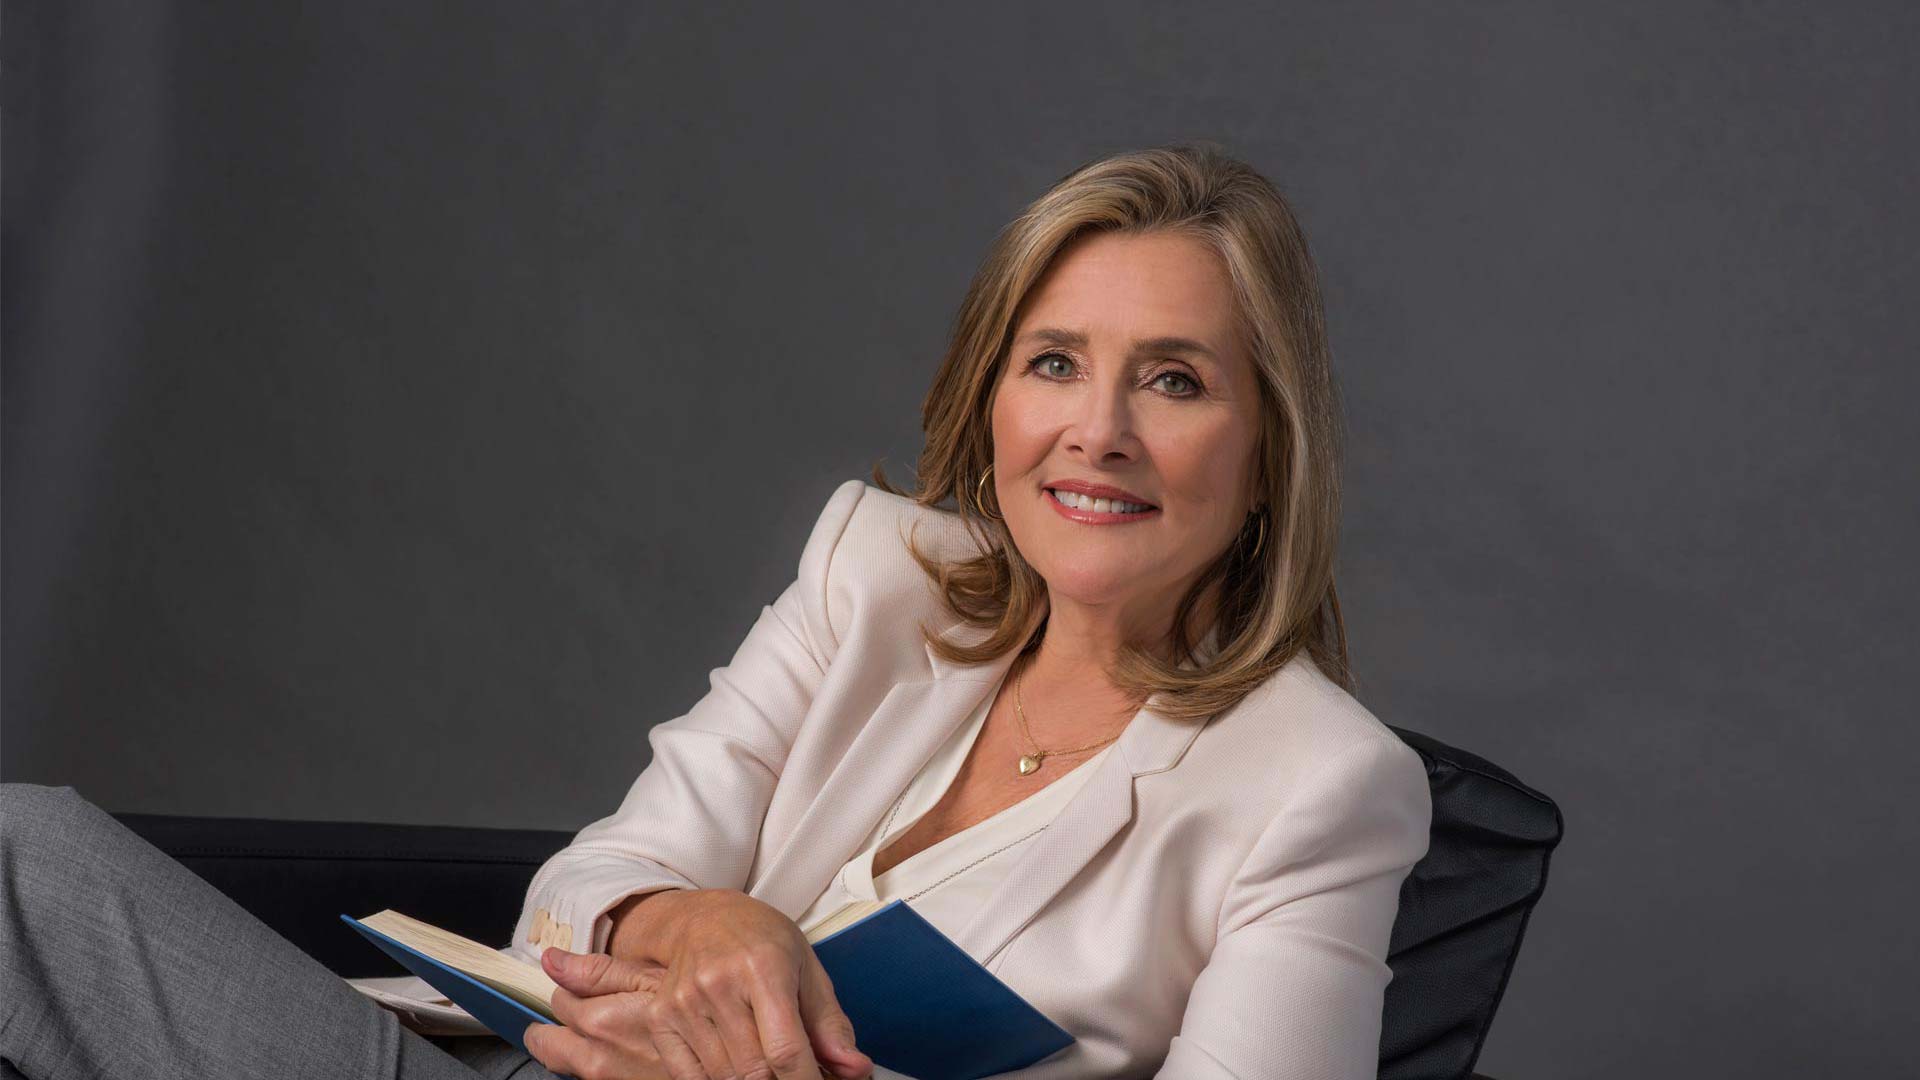 Meredith Vieira, host of THE GREAT AMERICAN READ.

